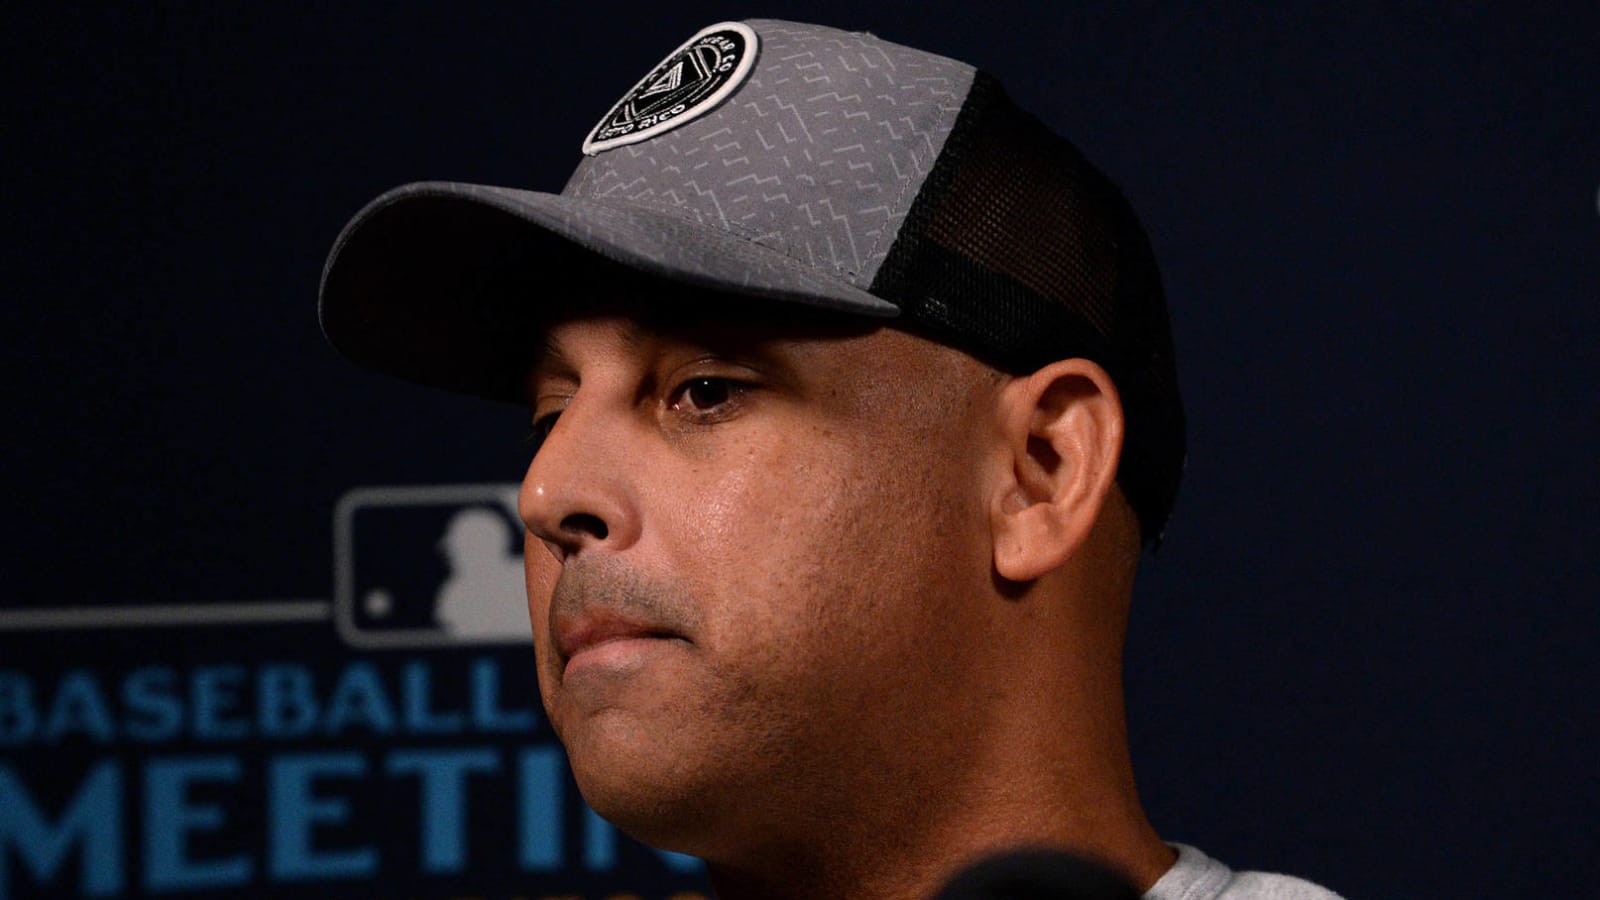 Alex Cora on Astros' sign-stealing scandal: 'We were all responsible'